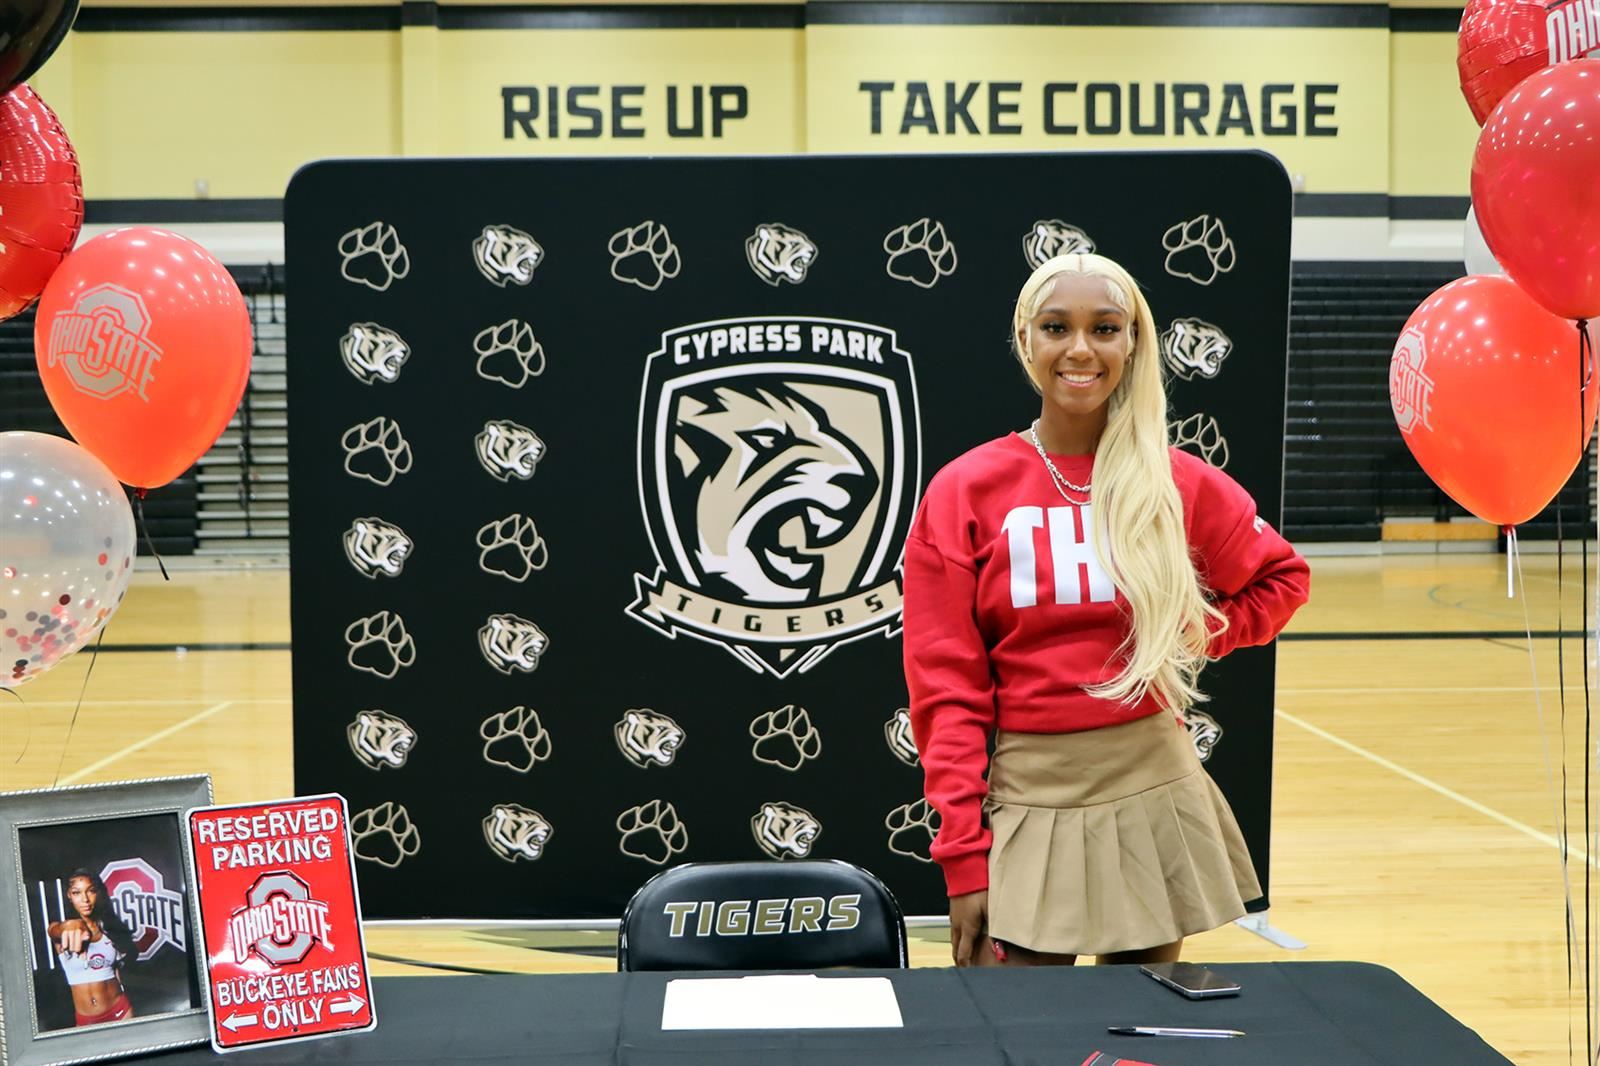 Cypress Park High School senior Sydnee Burr signed a letter of intent to run track collegiately at Ohio State University.